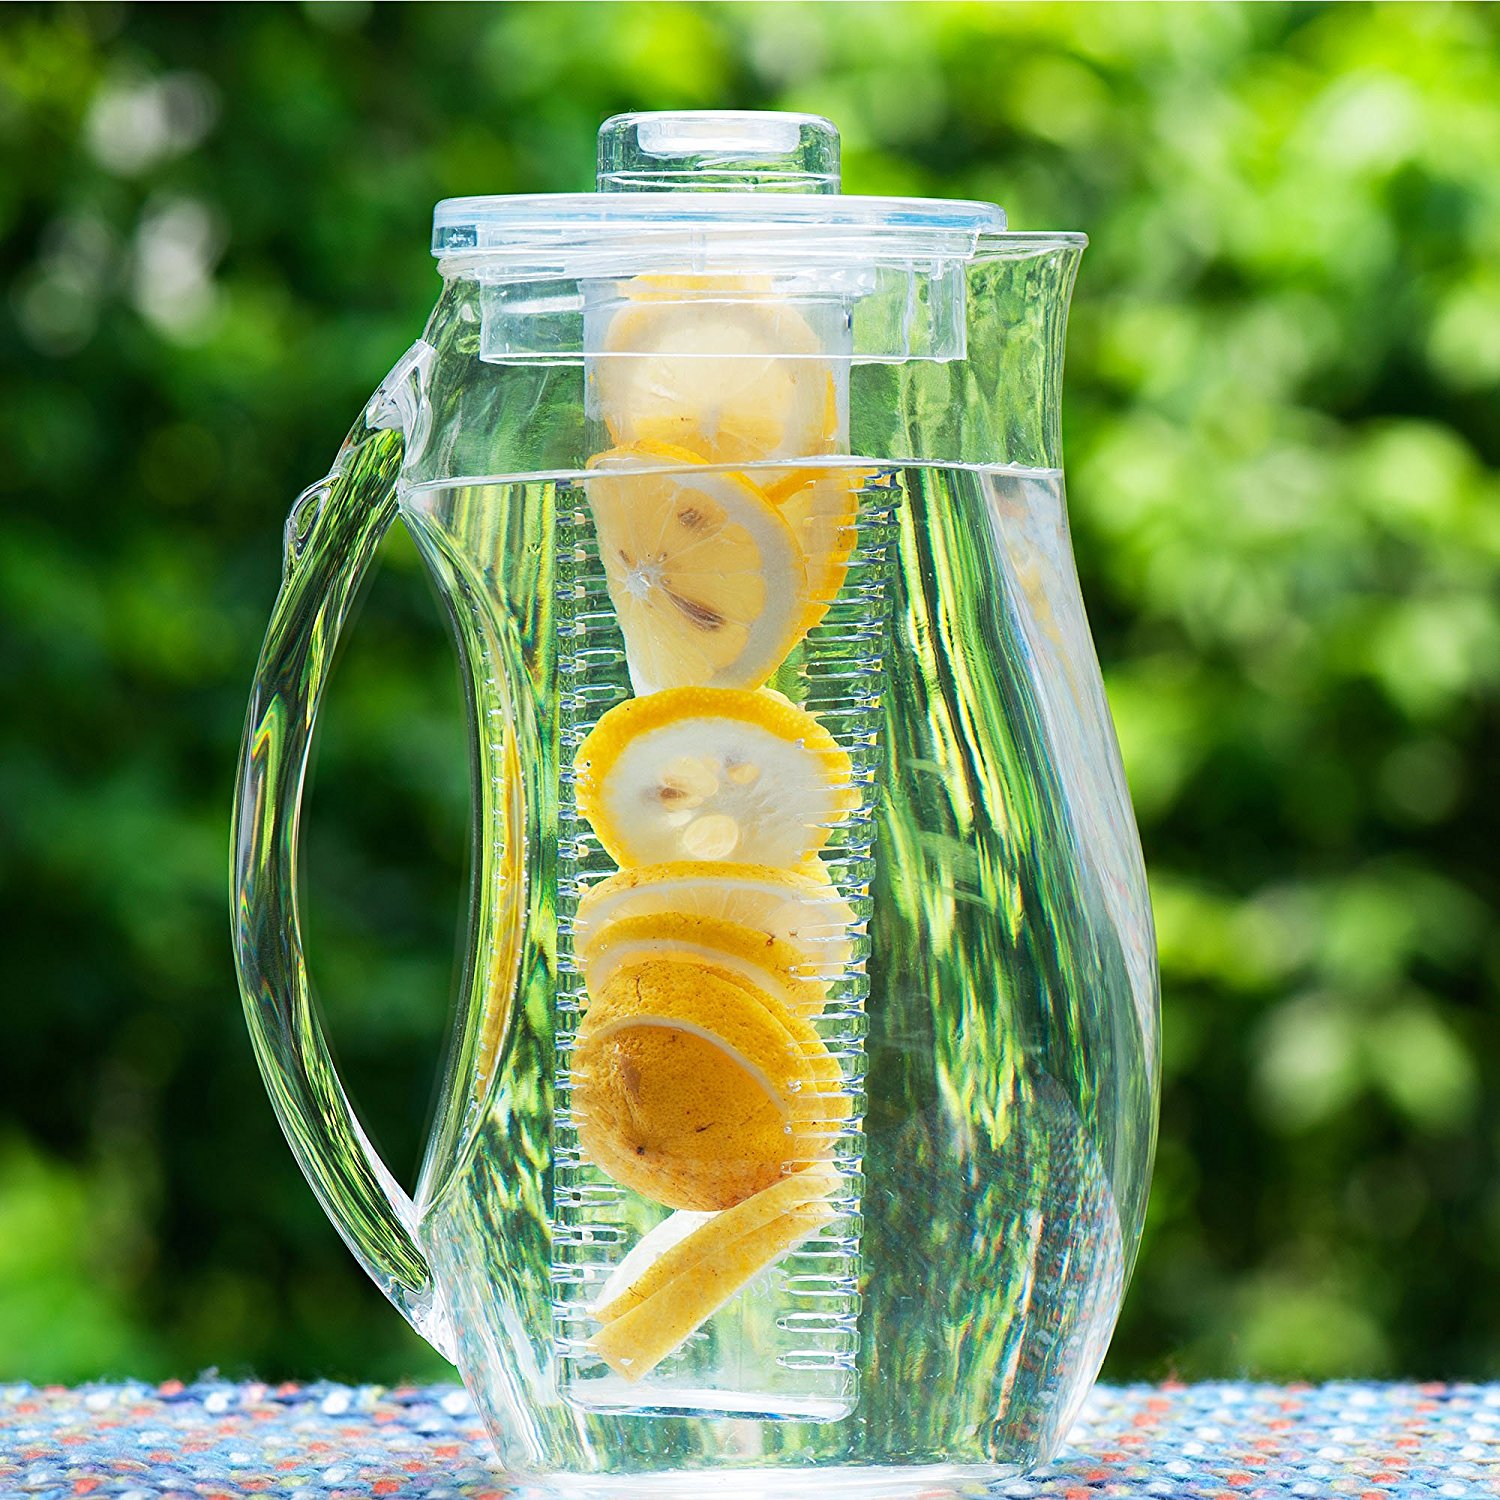 Infused water recipes - detox infused water with lemon